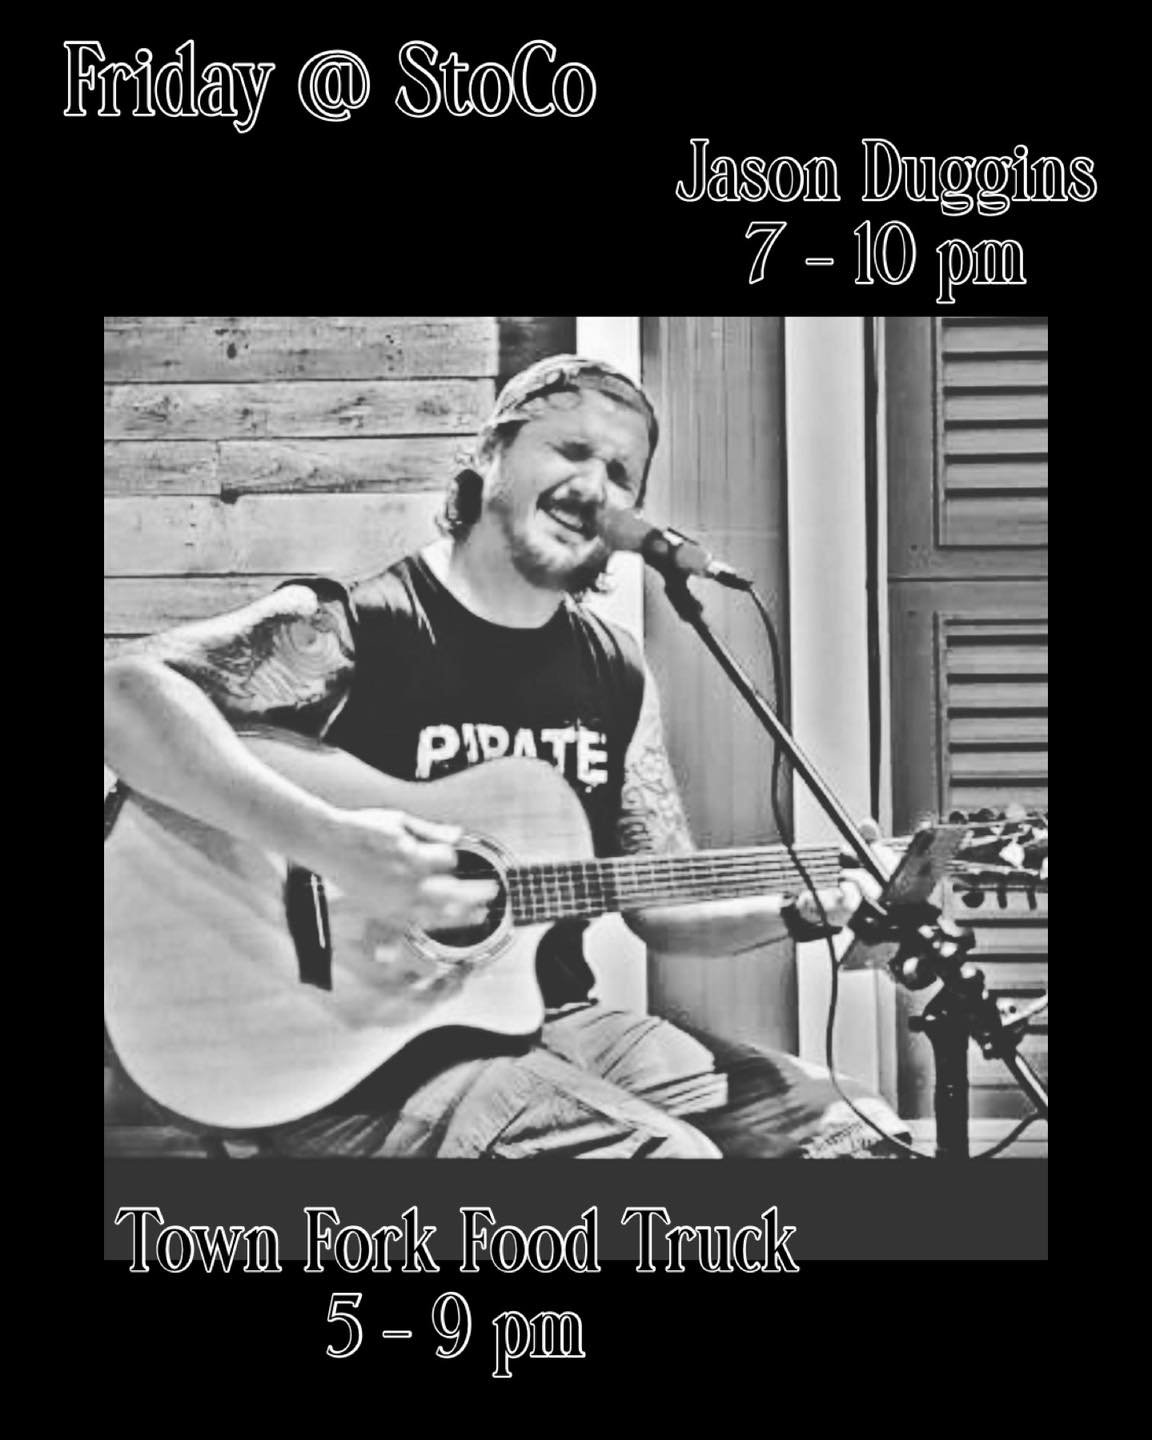 It&rsquo;s Friday! This weekend is going to be extra good! Coffee is on for an extra pep in your step, Jason Duggins Music is jamming tonight, delicious Town Fork Mobile Kitchen is serving dinner and drinks are chilled! Sounds like a great start to t